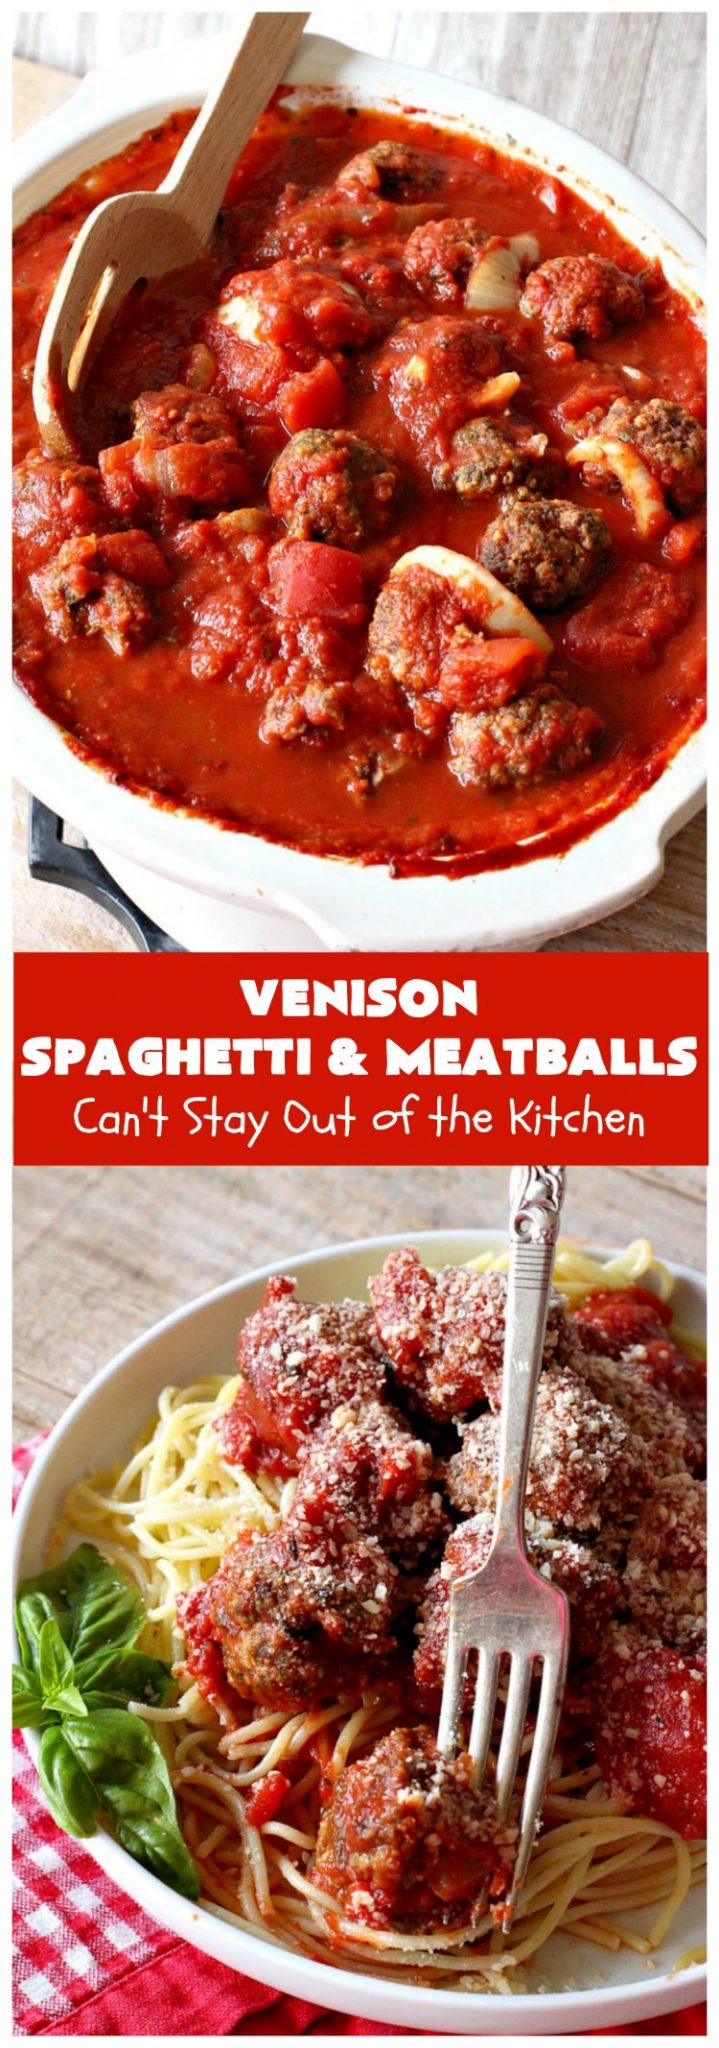 Venison Spaghetti and Meatballs – Can't Stay Out of the Kitchen